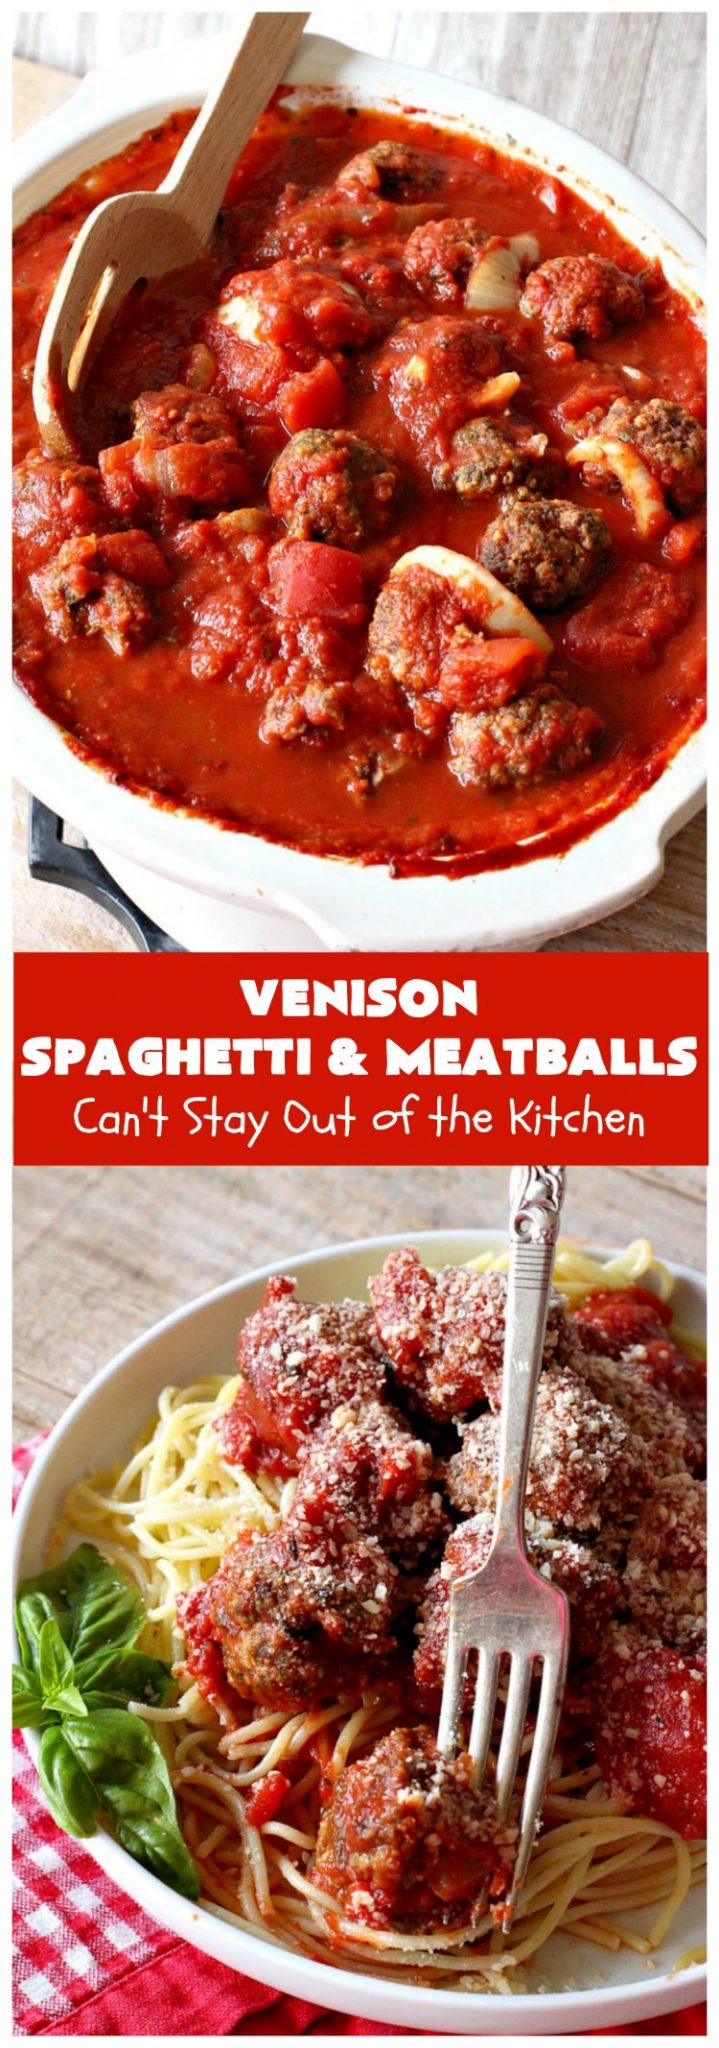 Venison Spaghetti and Meatballs – Can't Stay Out of the Kitchen